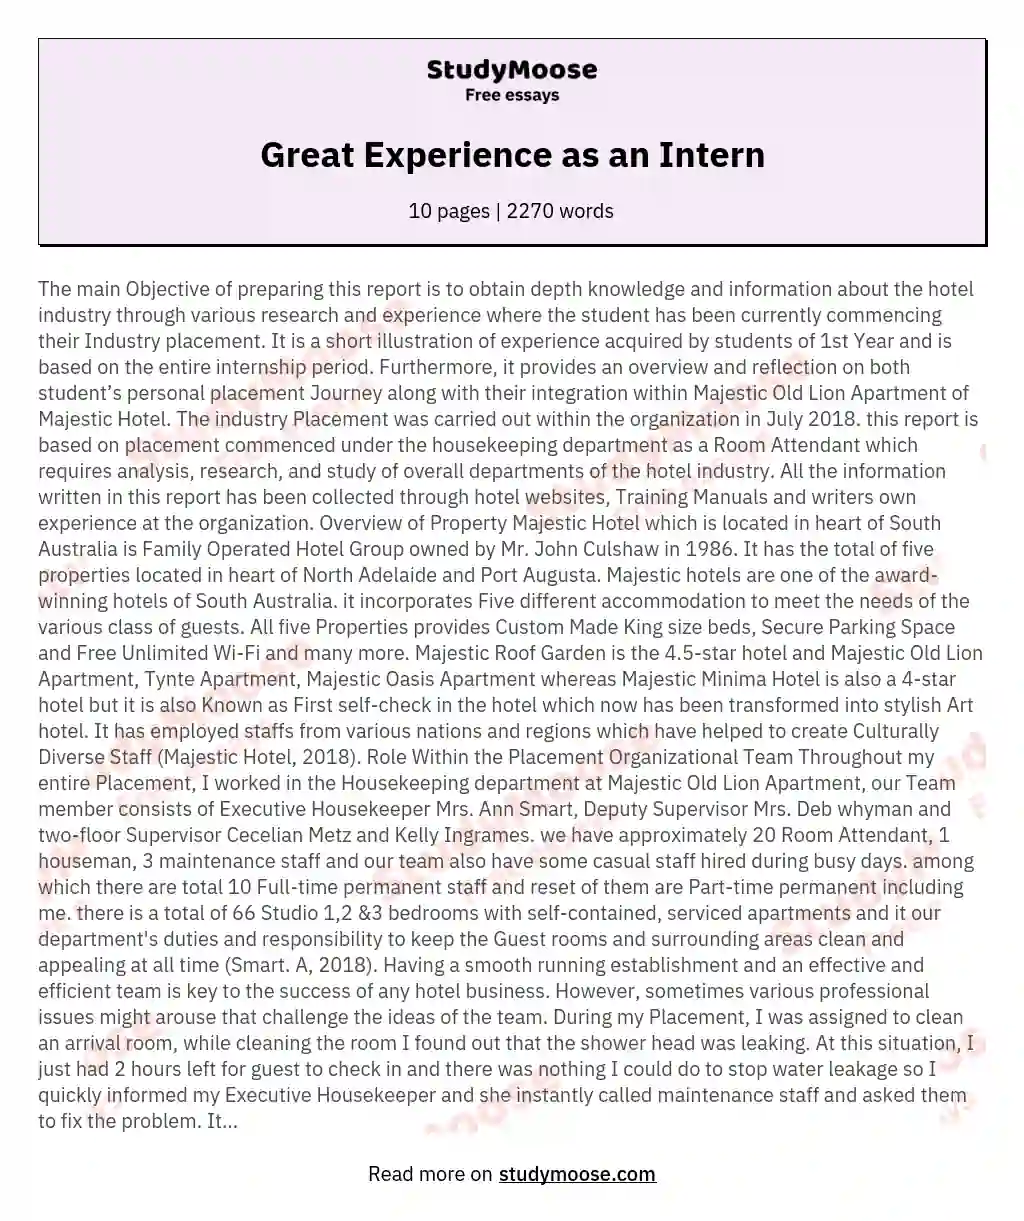 Great Experience as an Intern essay